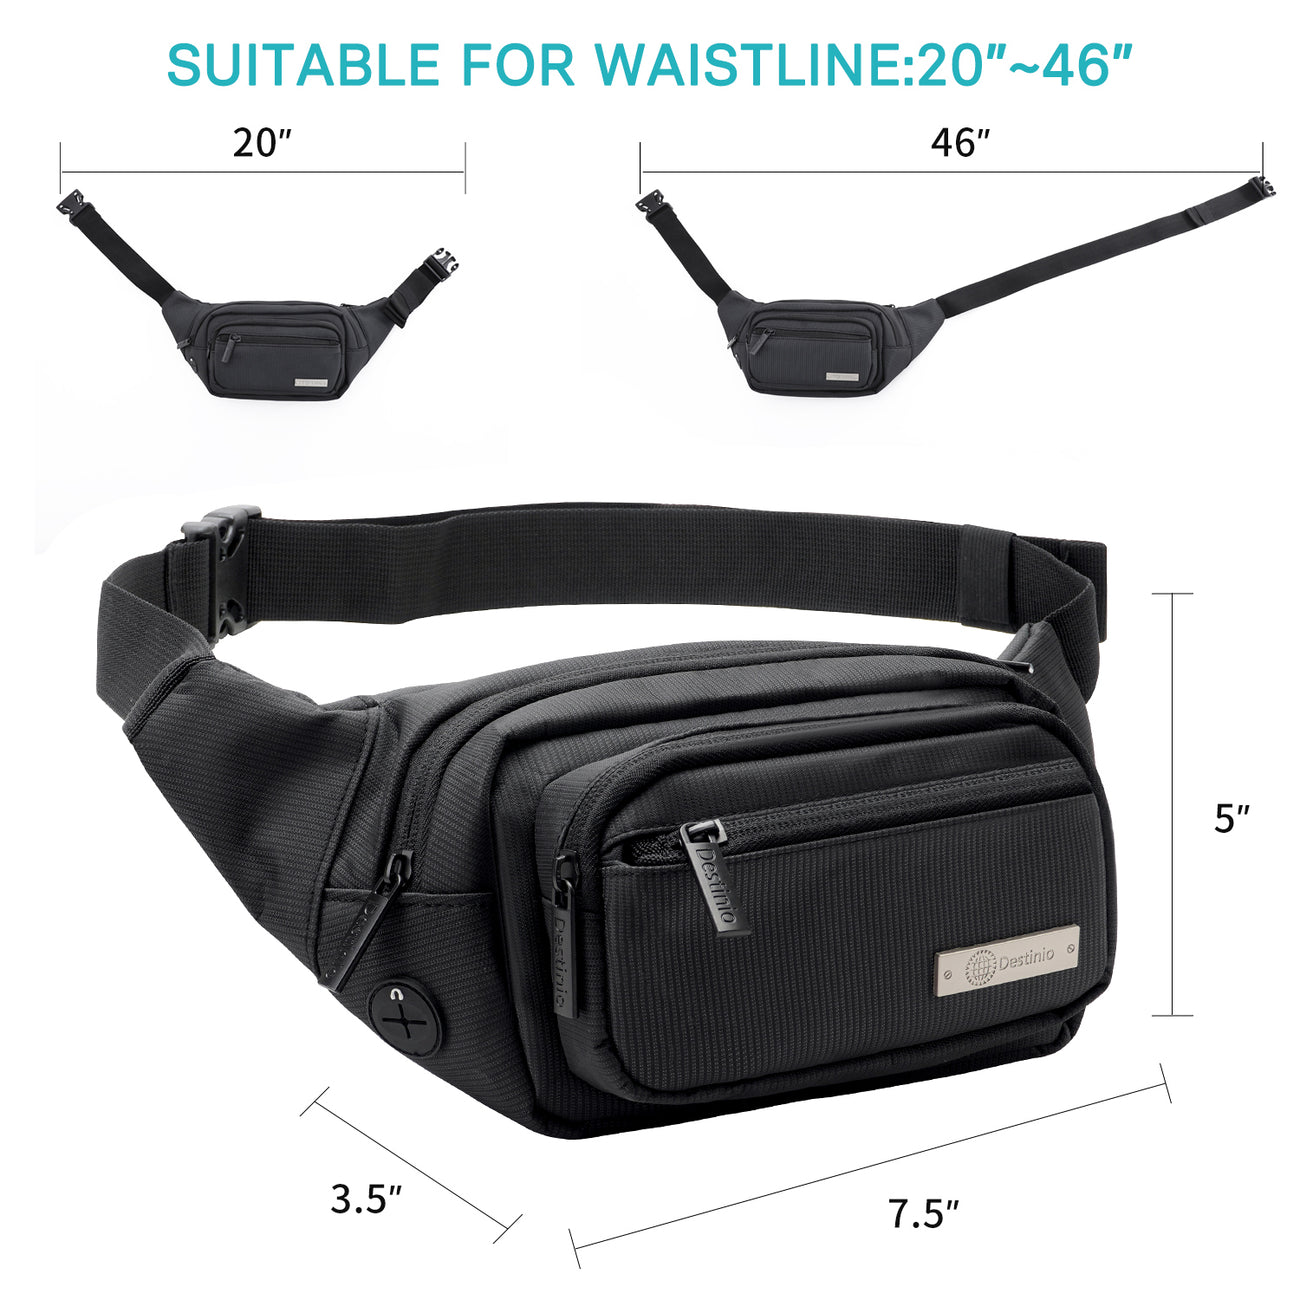 Destinio Travel Waist Pouch Bag for Men and Women, 46 Inches Strap, Black,  Polyester Fabric